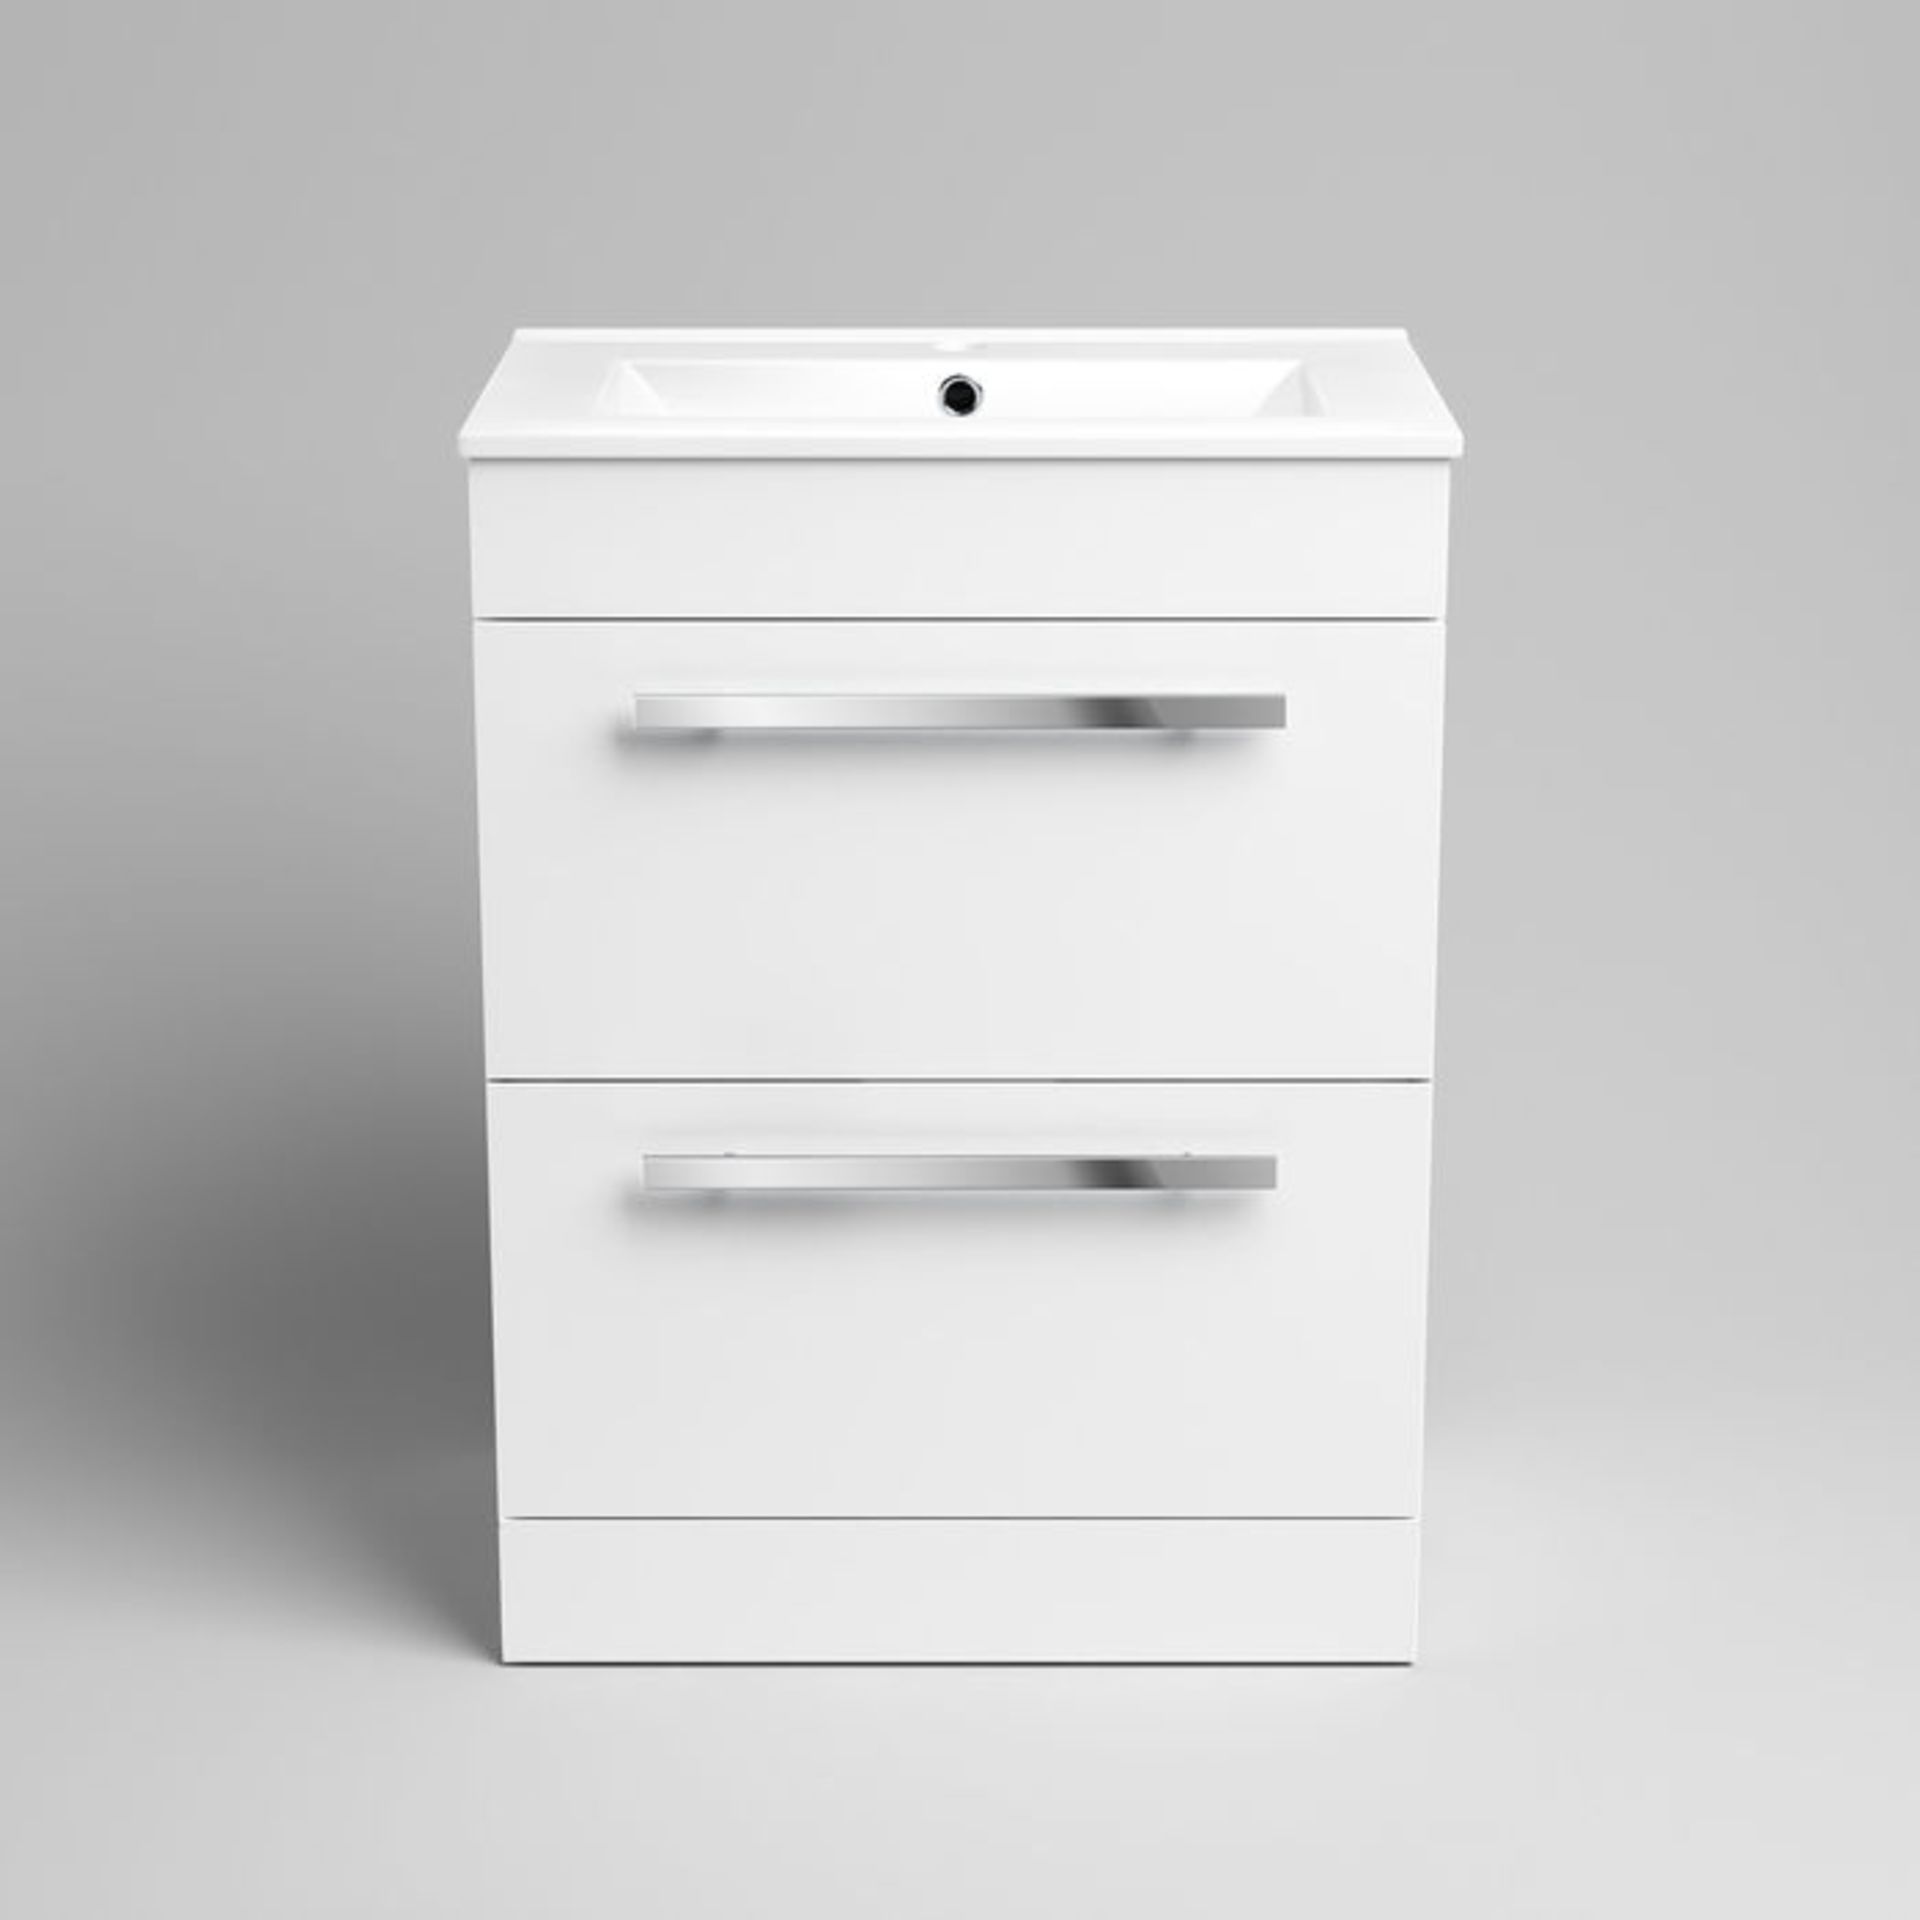 (DK305) 600mm Avon High Gloss White Double Drawer Basin Cabinet - Floor Standing. RRP £499.99. Comes - Image 5 of 5